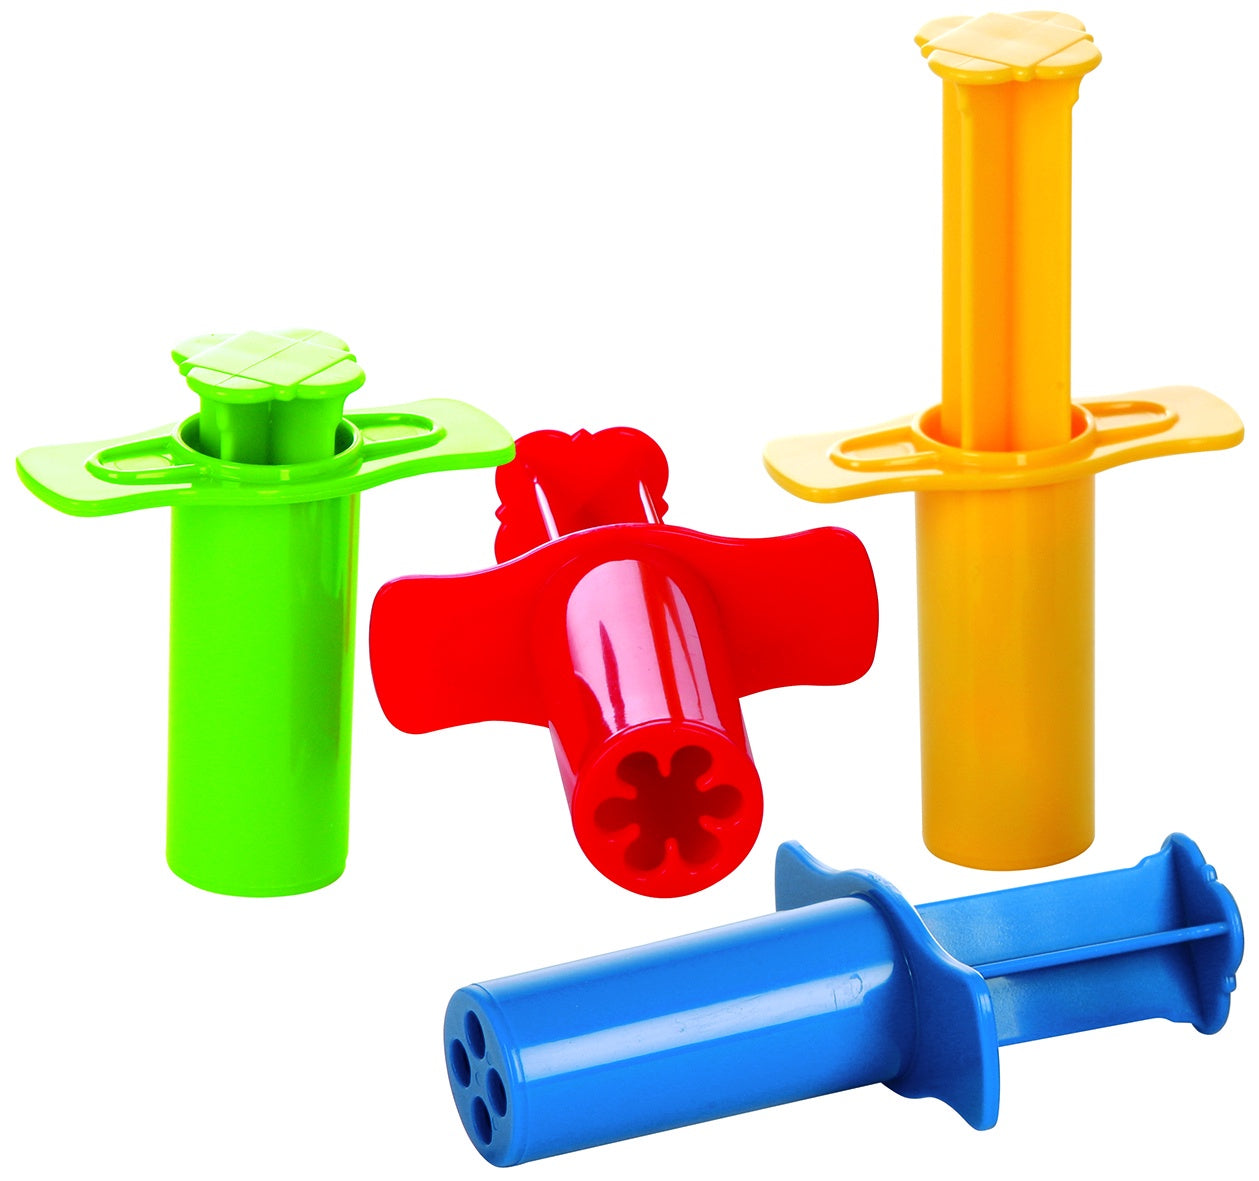 GOWI TOYS - Modeling Shot/Extruder - 4 Piece